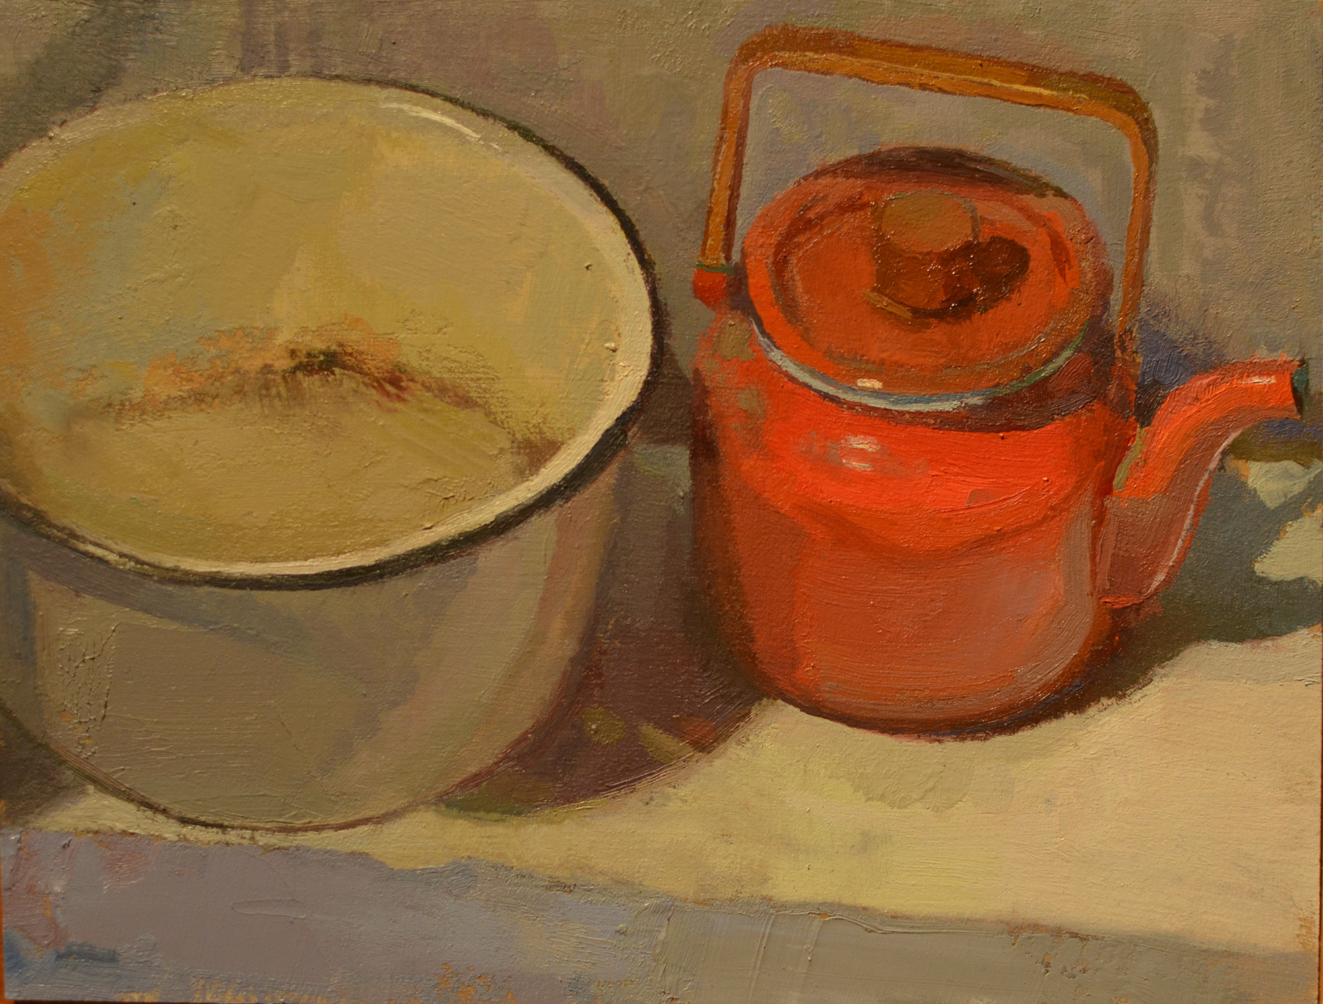 Orange Kettle / oil on paper / 6" x 8" / 2020 / Private Collection